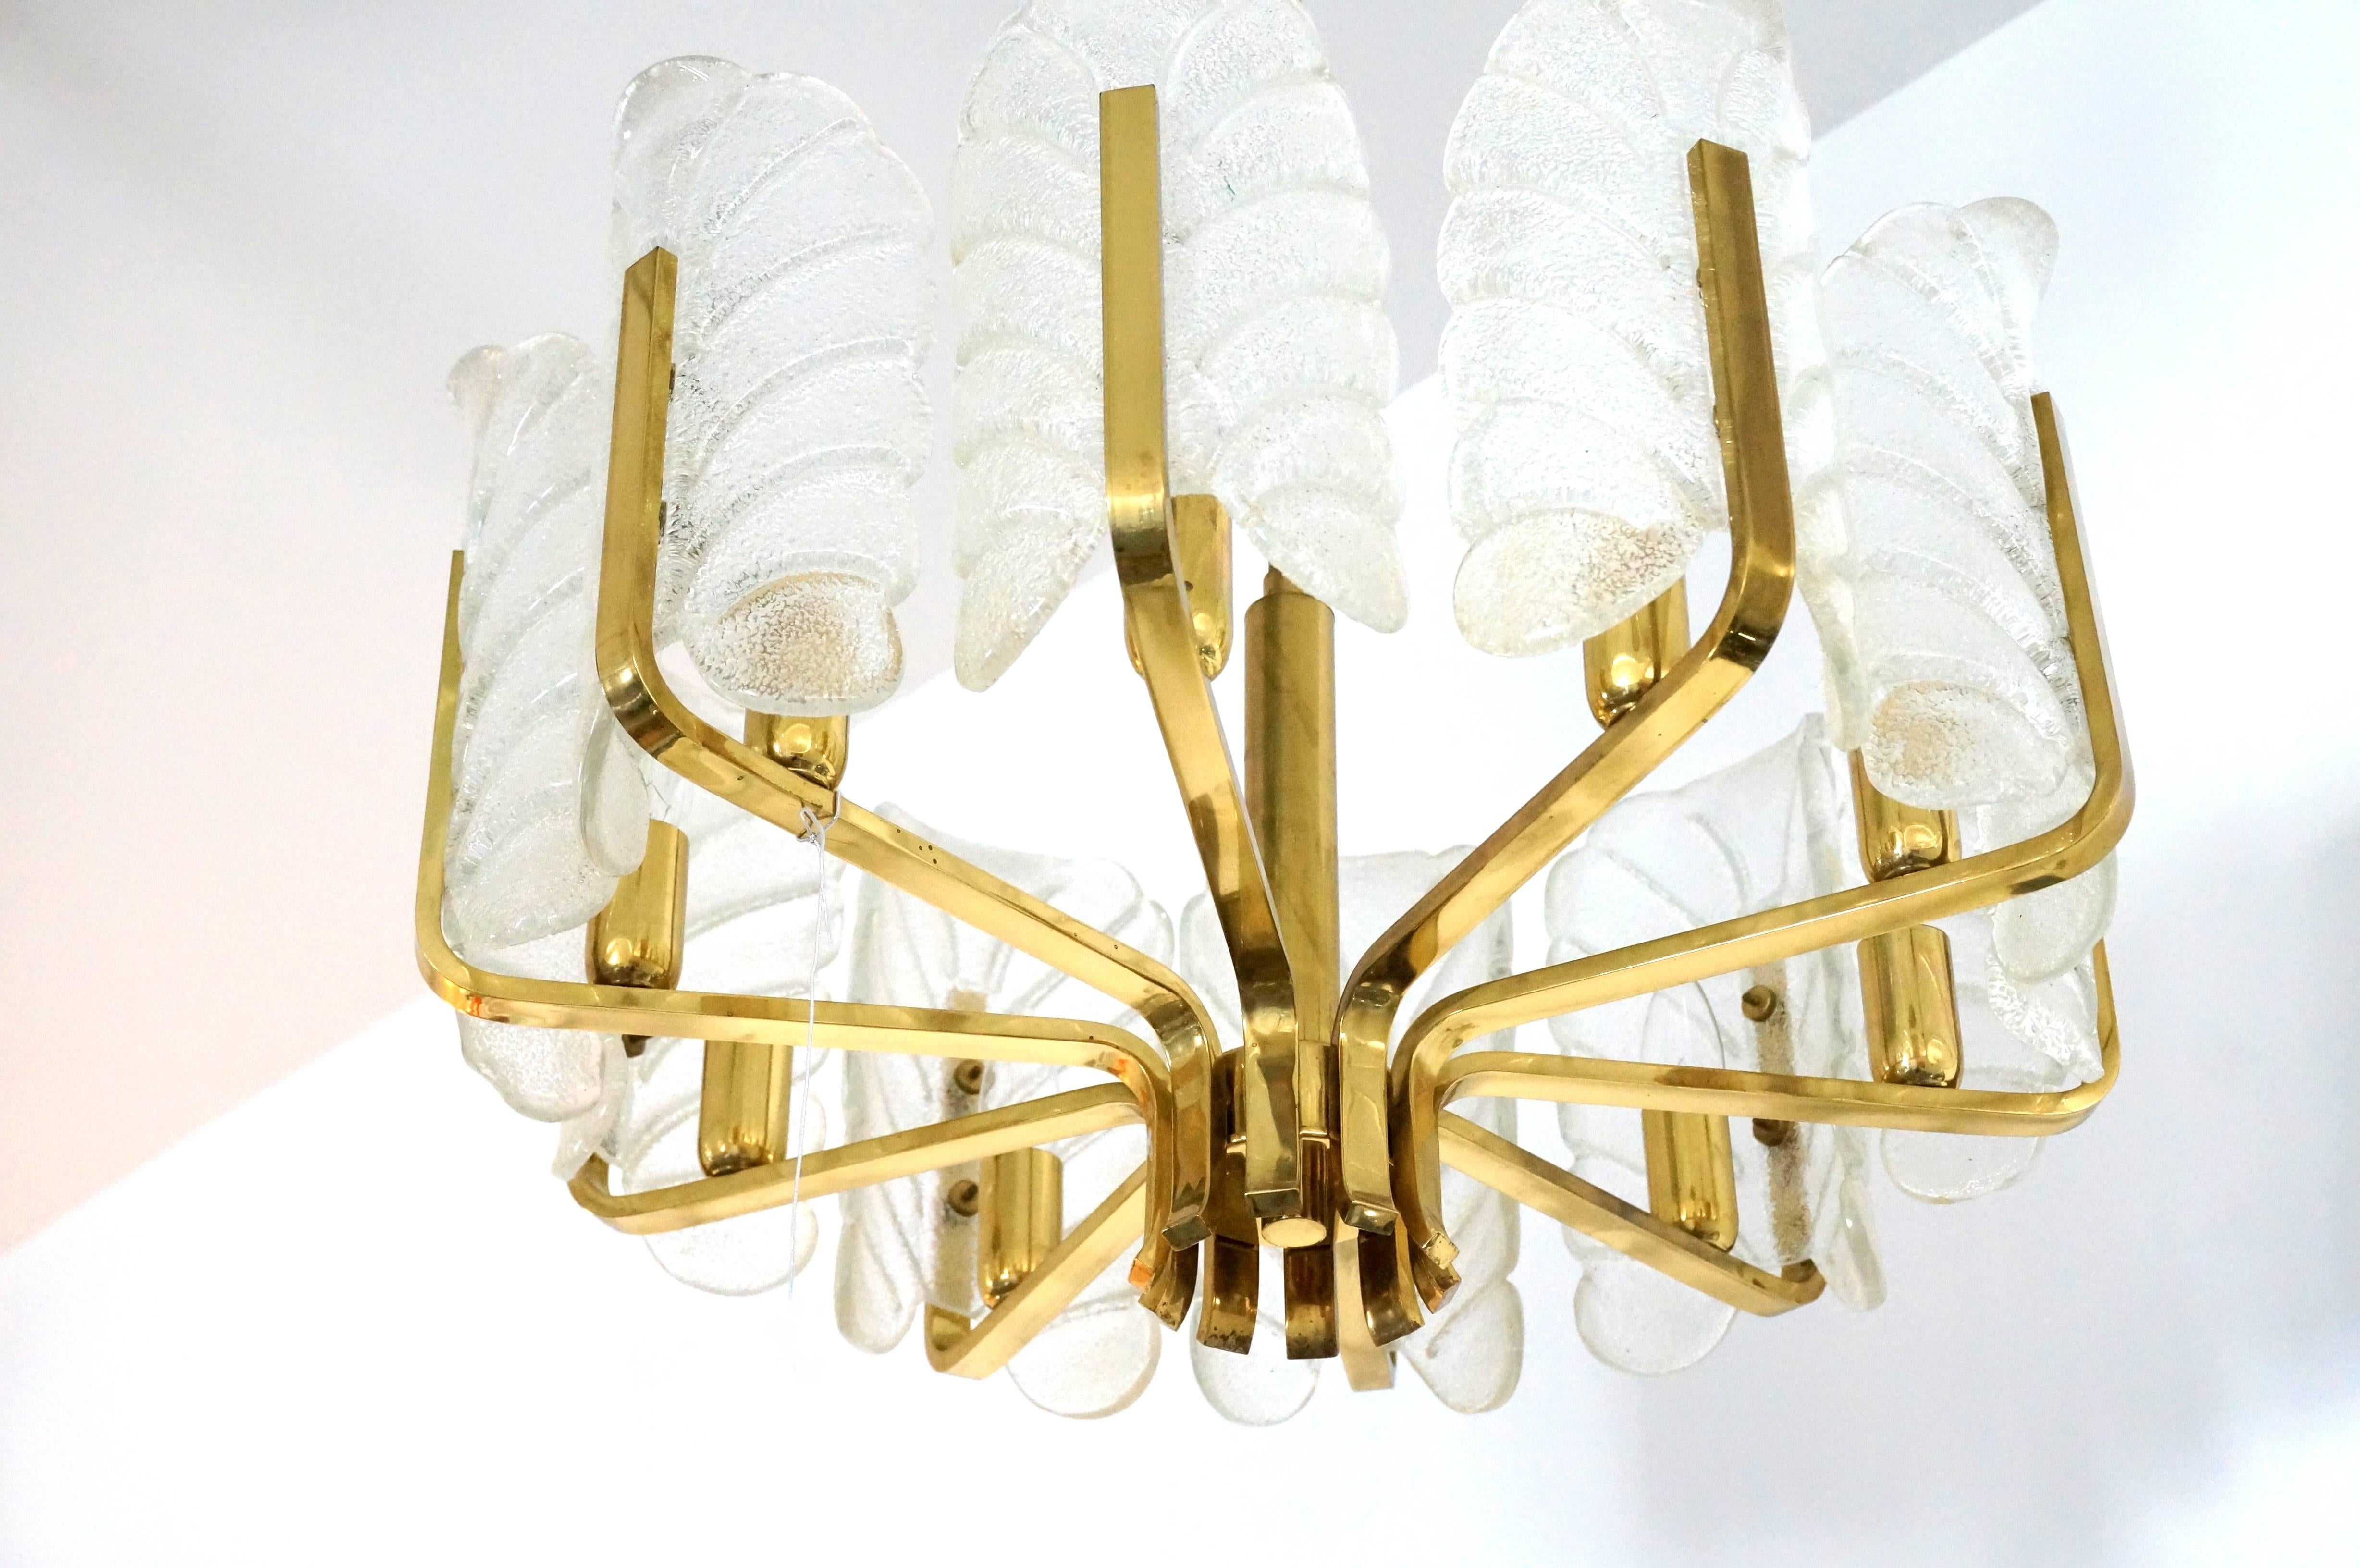 This Hollywood-Regency style chandelier was produced in the 1960s by the iconic firm of Oreffors and designed by Carl Fagerlund.  The ten stylized glass-leaf shades are in a molten clear and white coloration.  The piece has a great movement to it